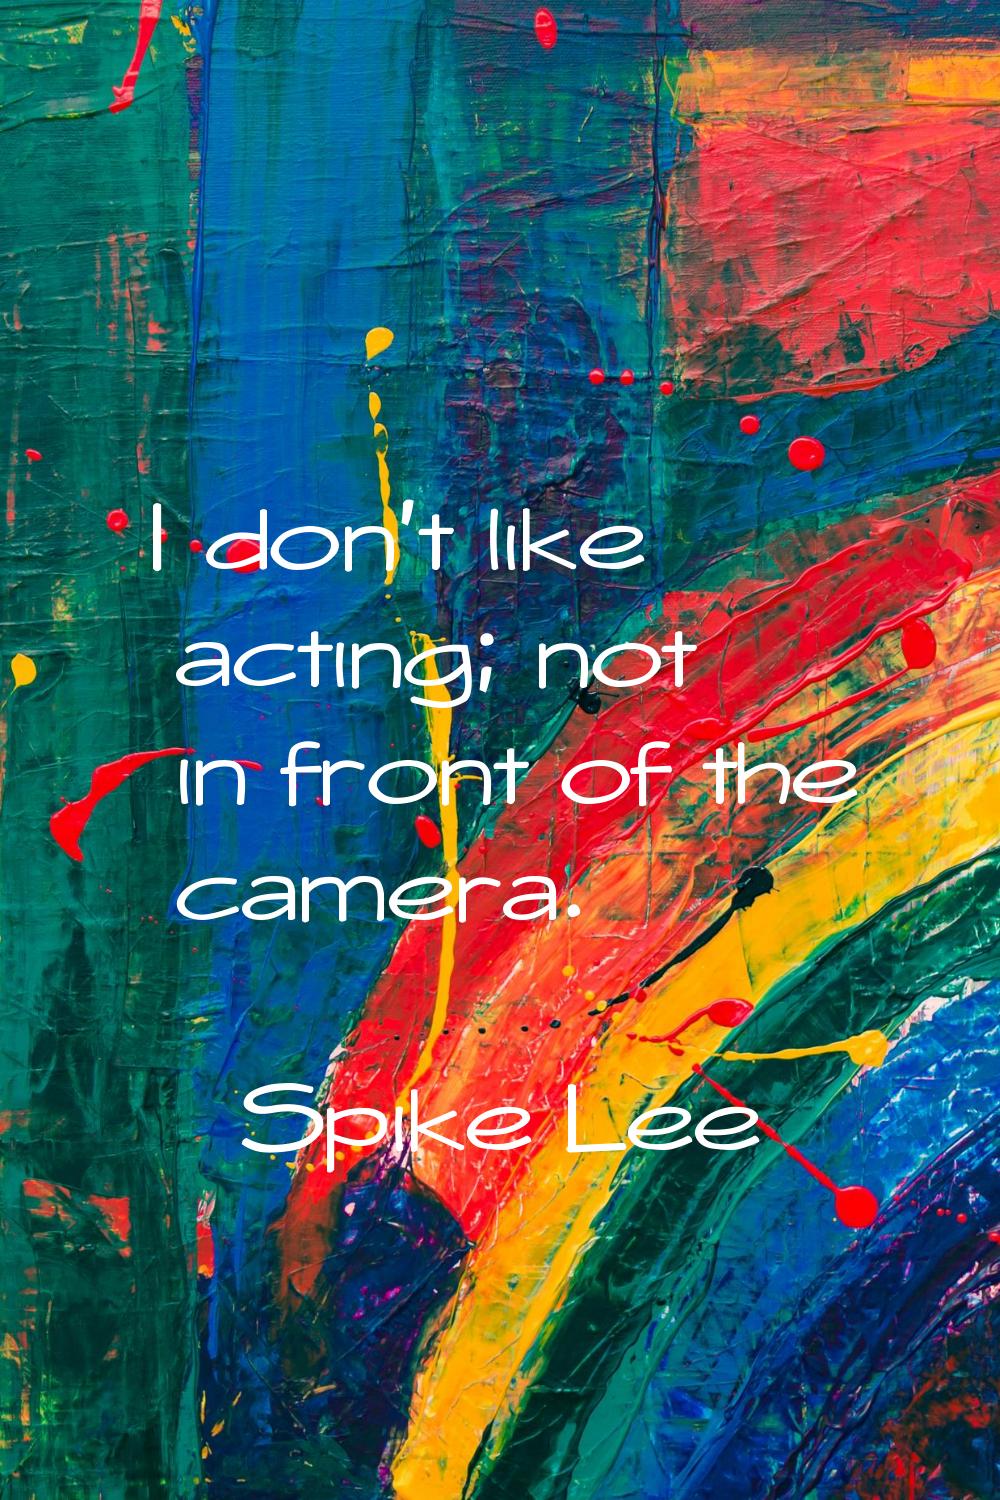 I don't like acting; not in front of the camera.